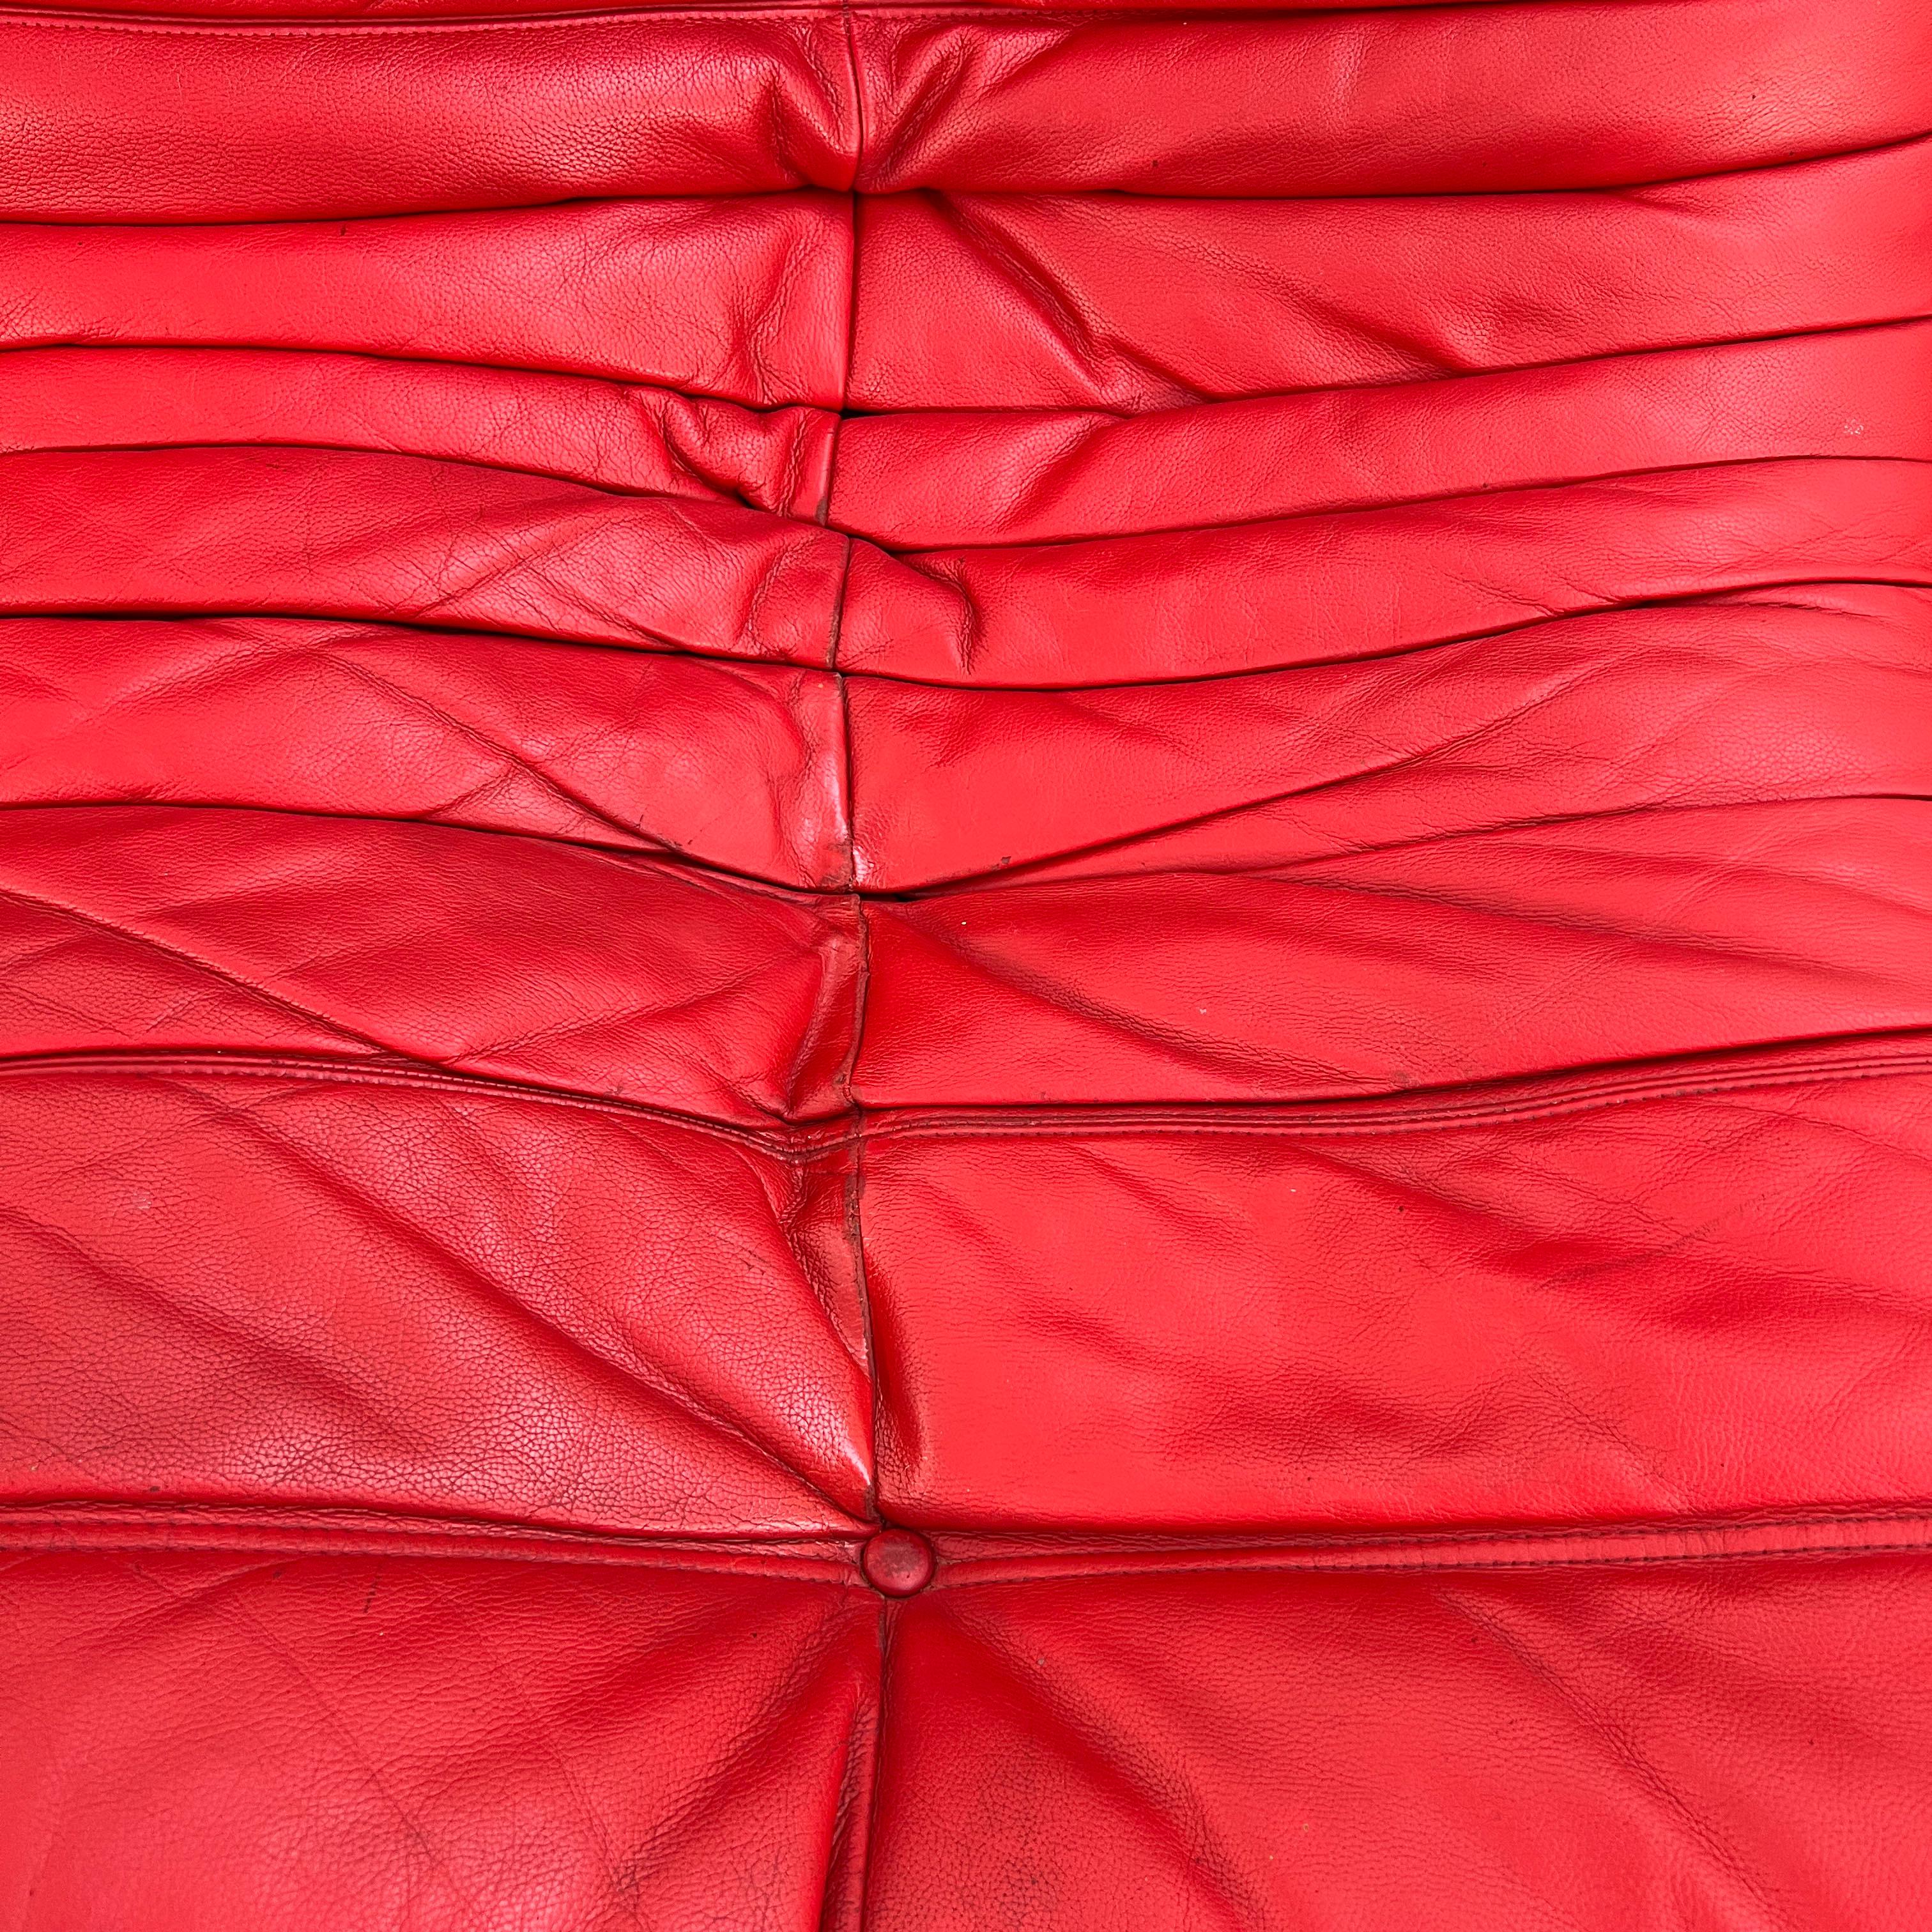 Togo Sofa Set in Red Leather by Michel Ducaroy for Ligne Roset, 1970s For Sale 4